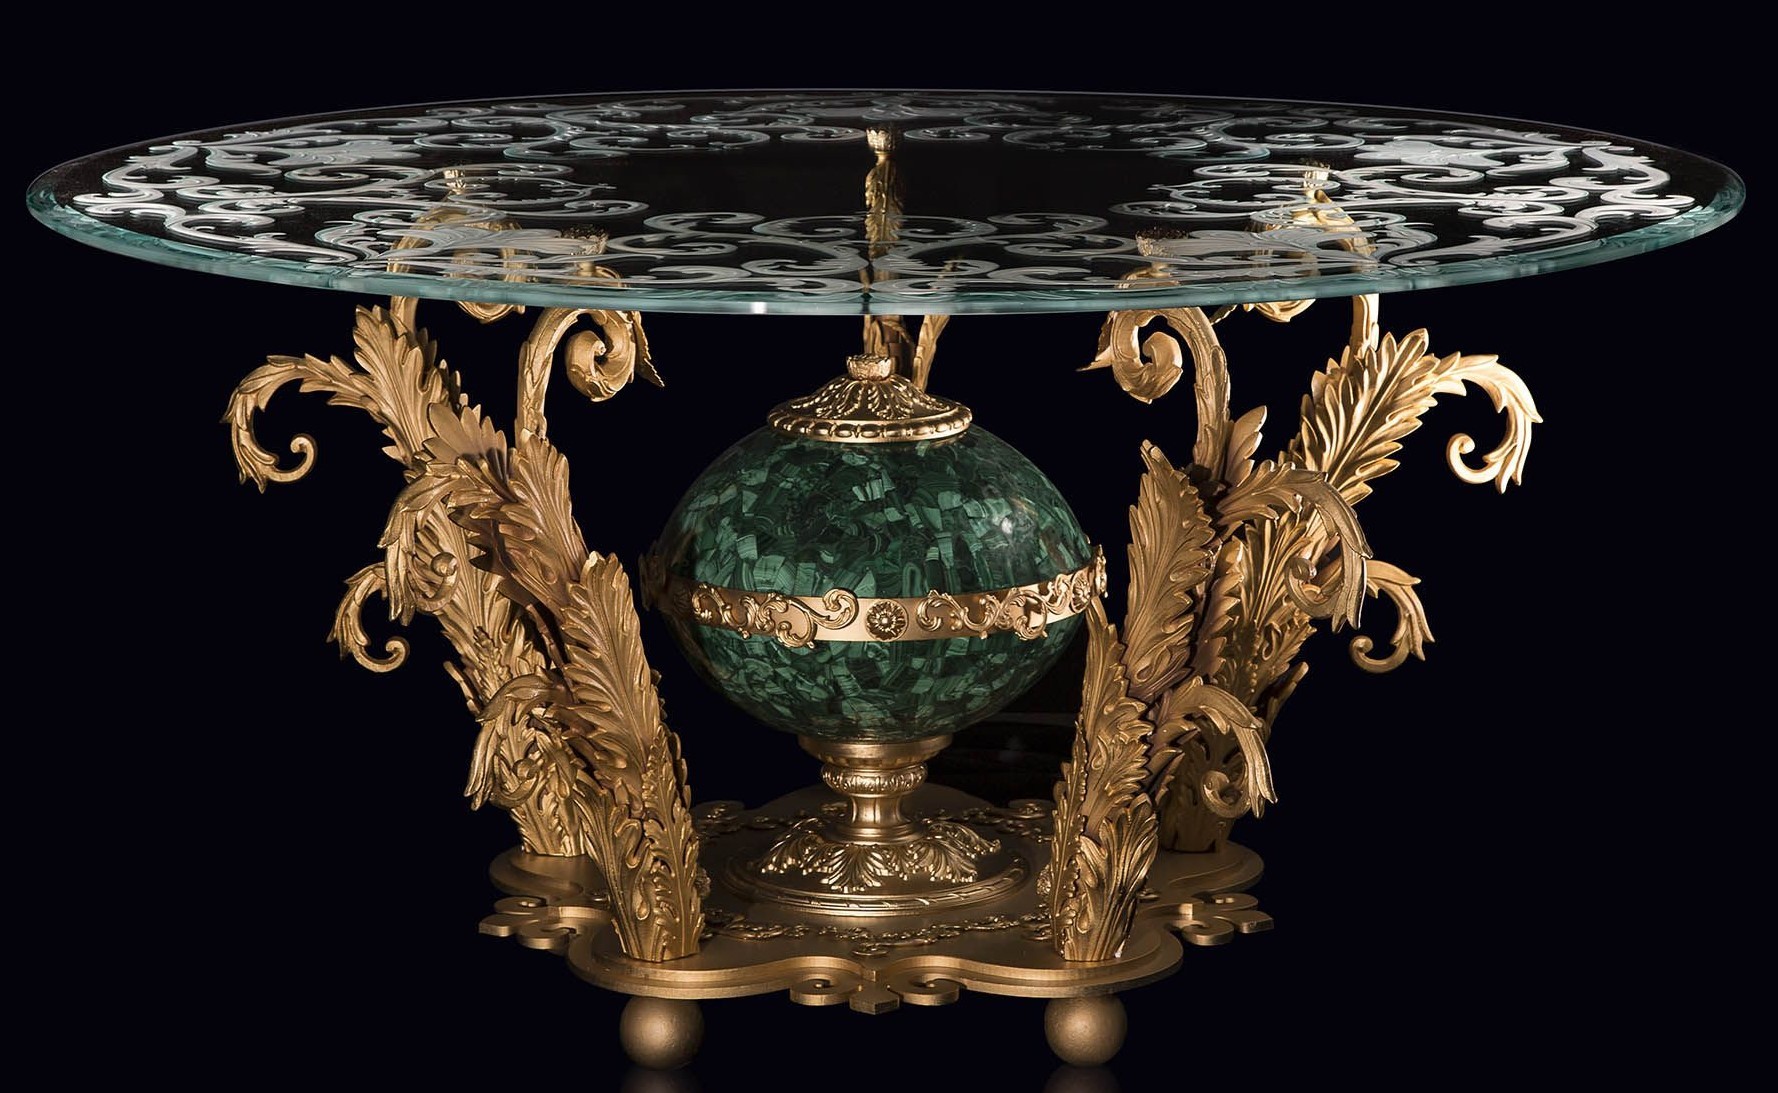 Foyer and Center Tables An amazing foyer table with gold plated brass and precious malachite stone.